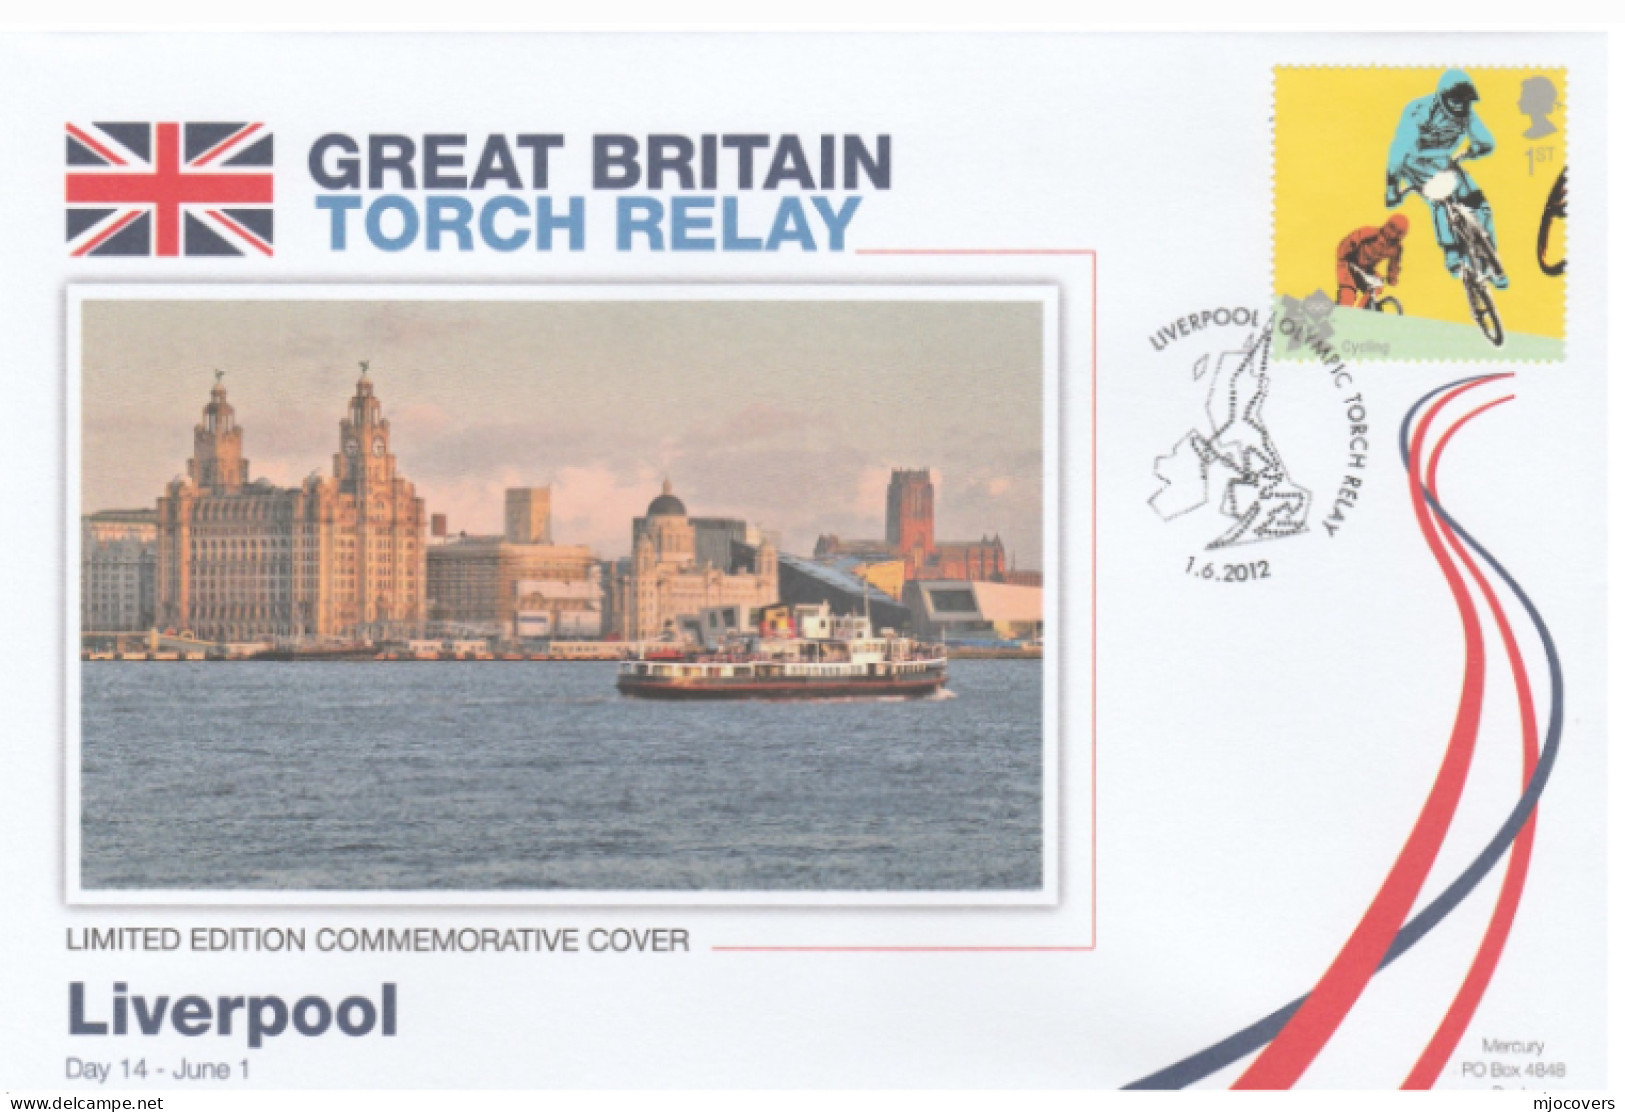 2012 Ltd Edn MERSEY FERRY OLYMPICS TORCH Relay Liverpool COVER London OLYMPIC GAMES Sport BMX Cycling Bicycle  Stamps GB - Verano 2012: Londres